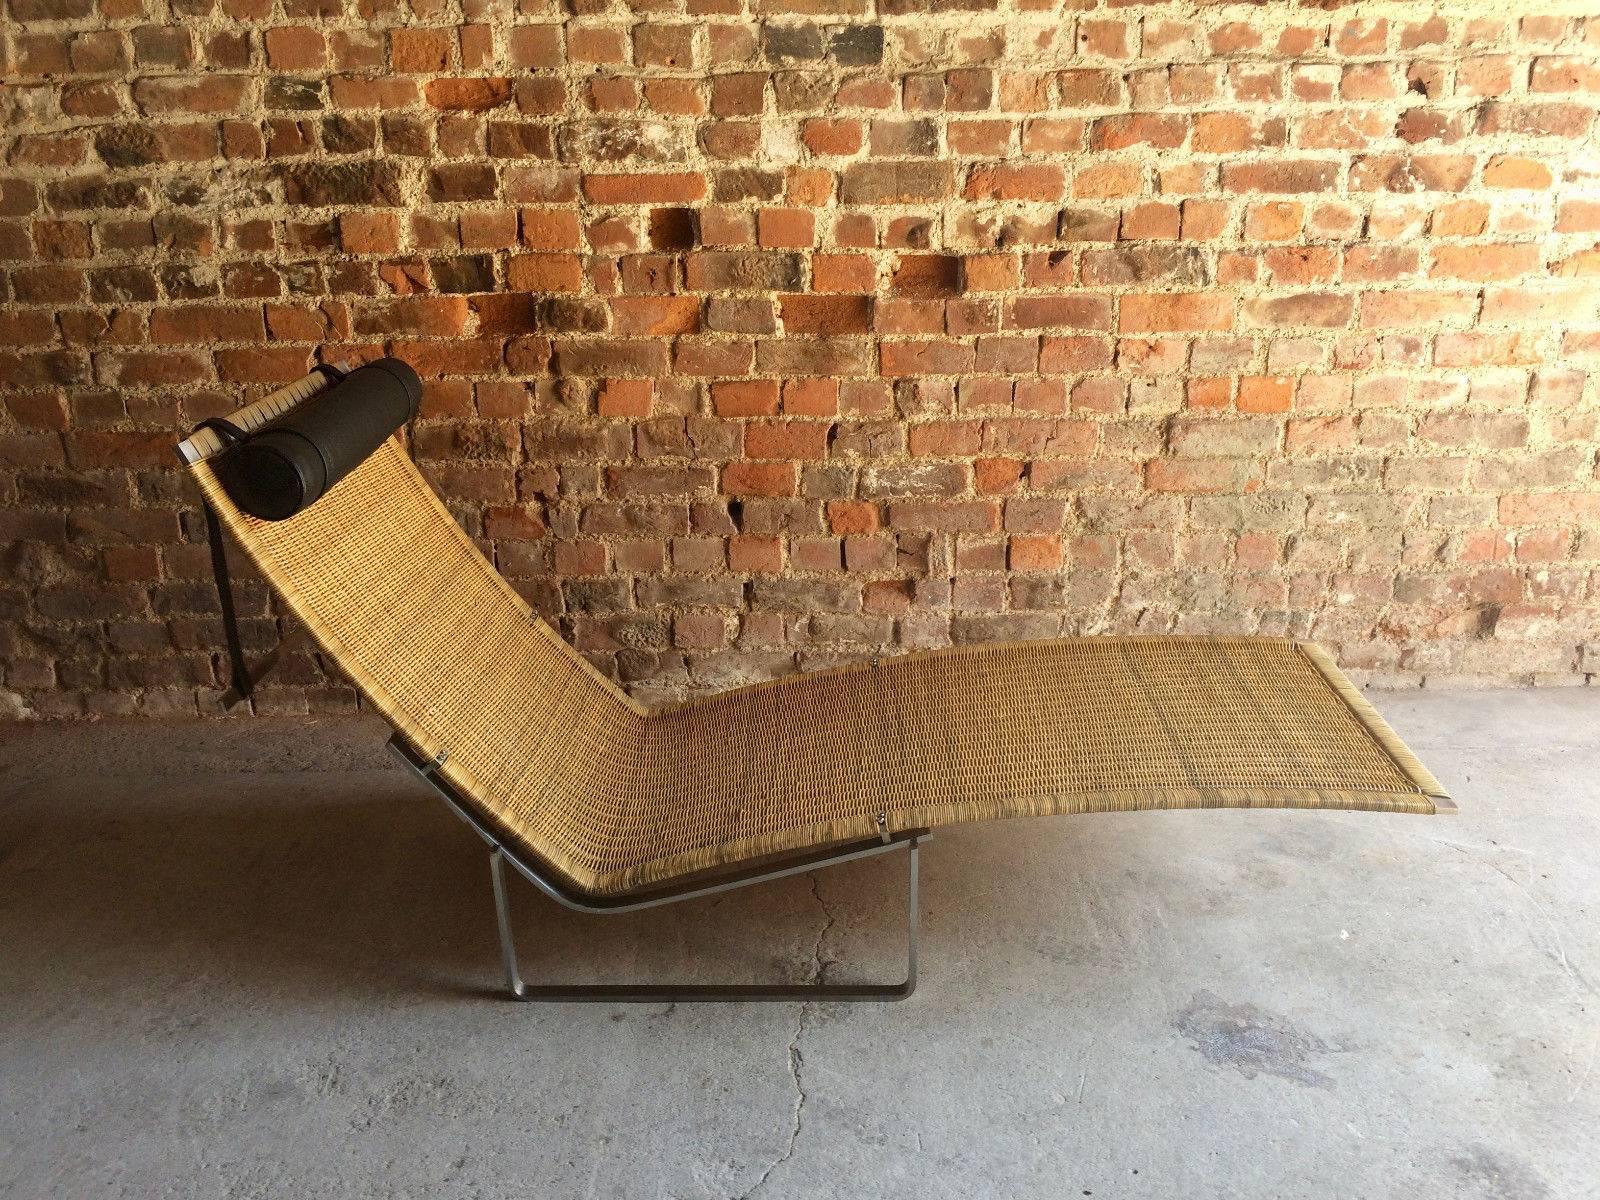 A magnificent 'right on trend' iconic designer lounger after Poul Kjærholm, a chaise longue lounger model no. PK24 designed by Poul Kjaerholm originally produced for the first time in 1965, this chair is composed of three elements, the brushed steel